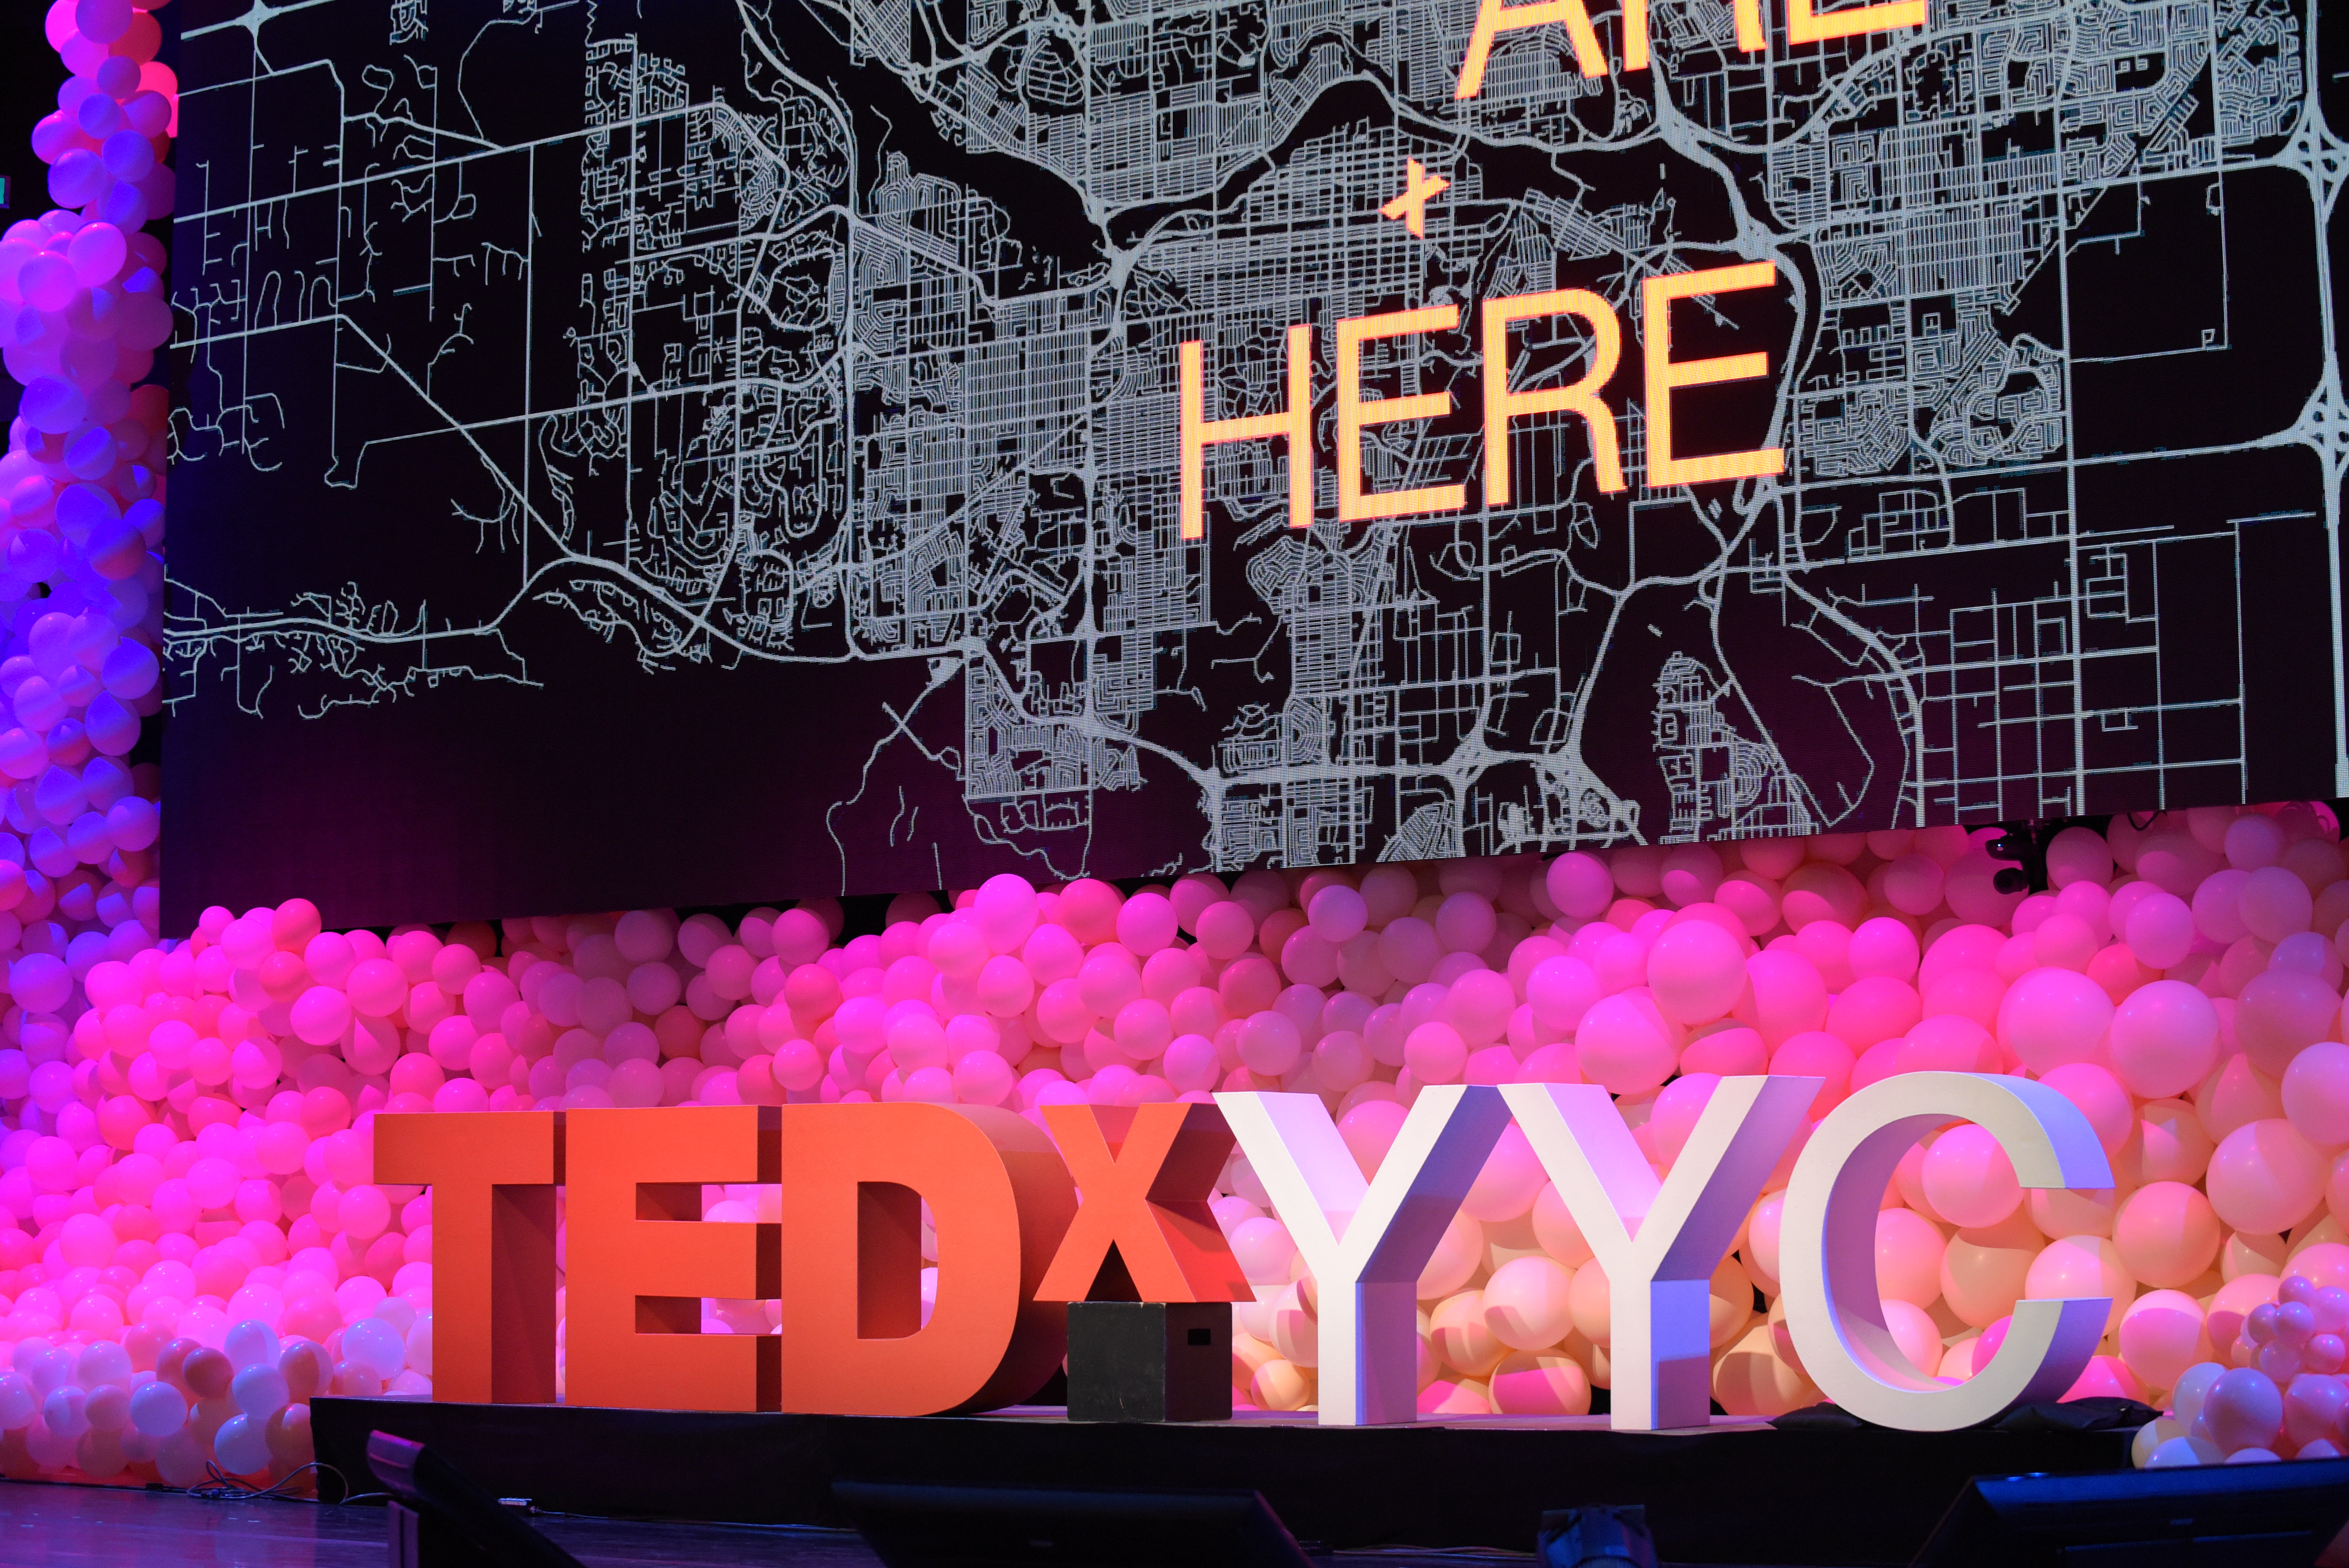 Live from TEDxYYC 2019:  Part 2 of 2